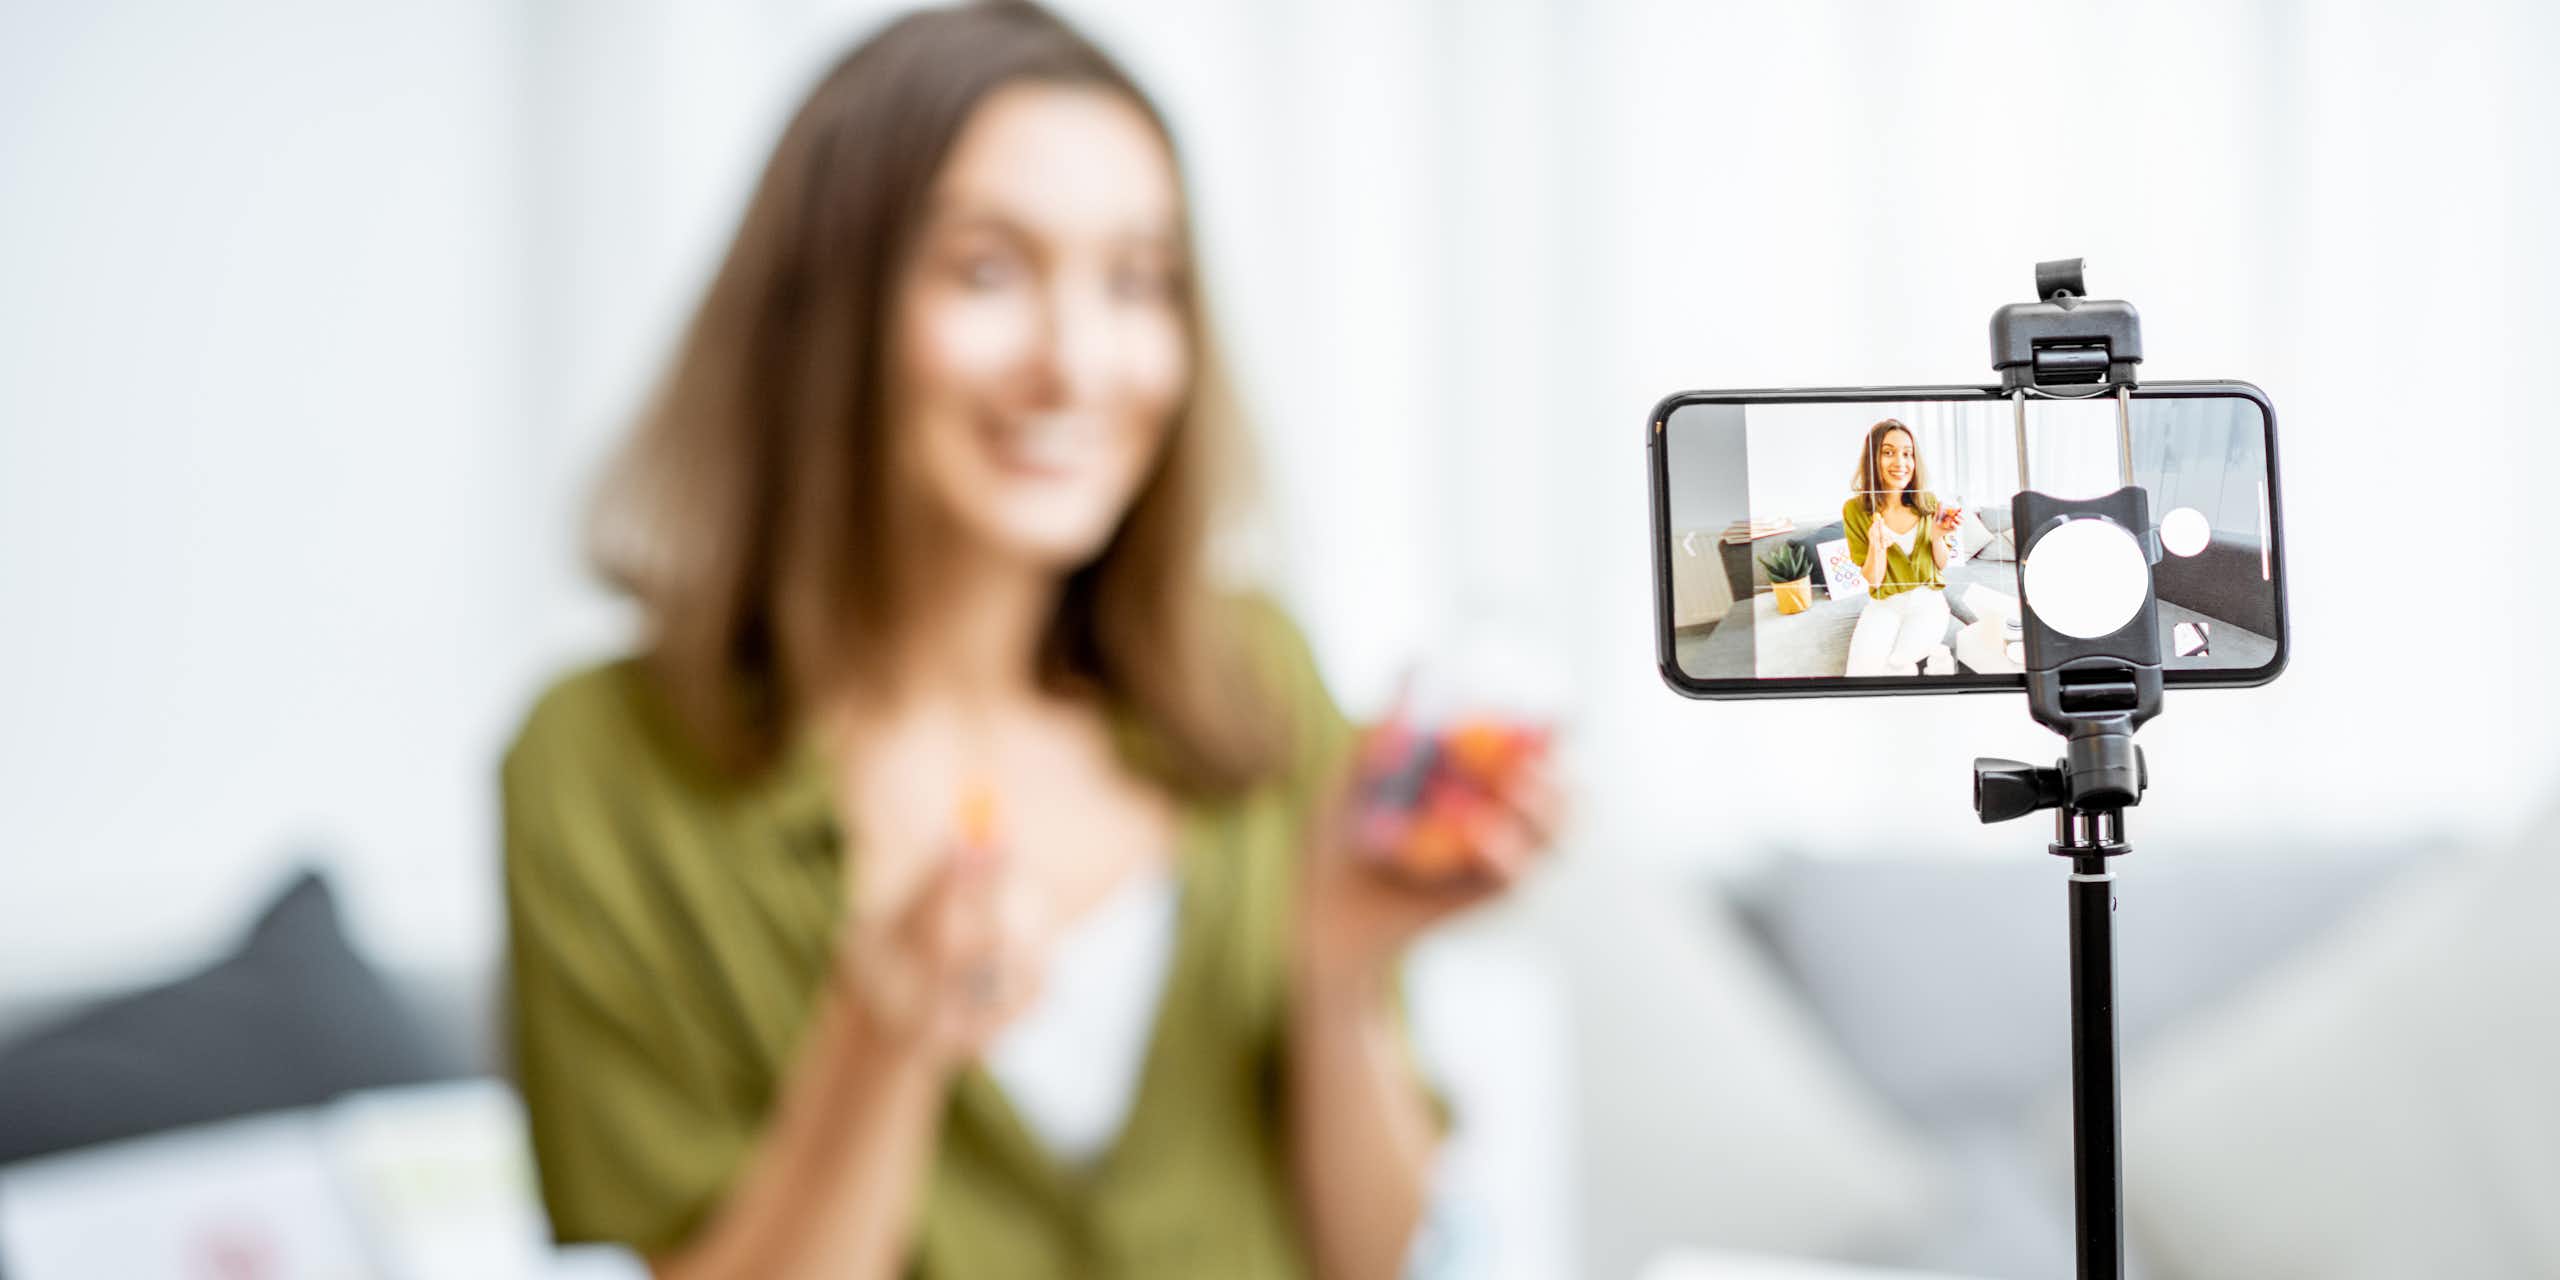 A woman out of focus recording video on a smartphone in the foreground